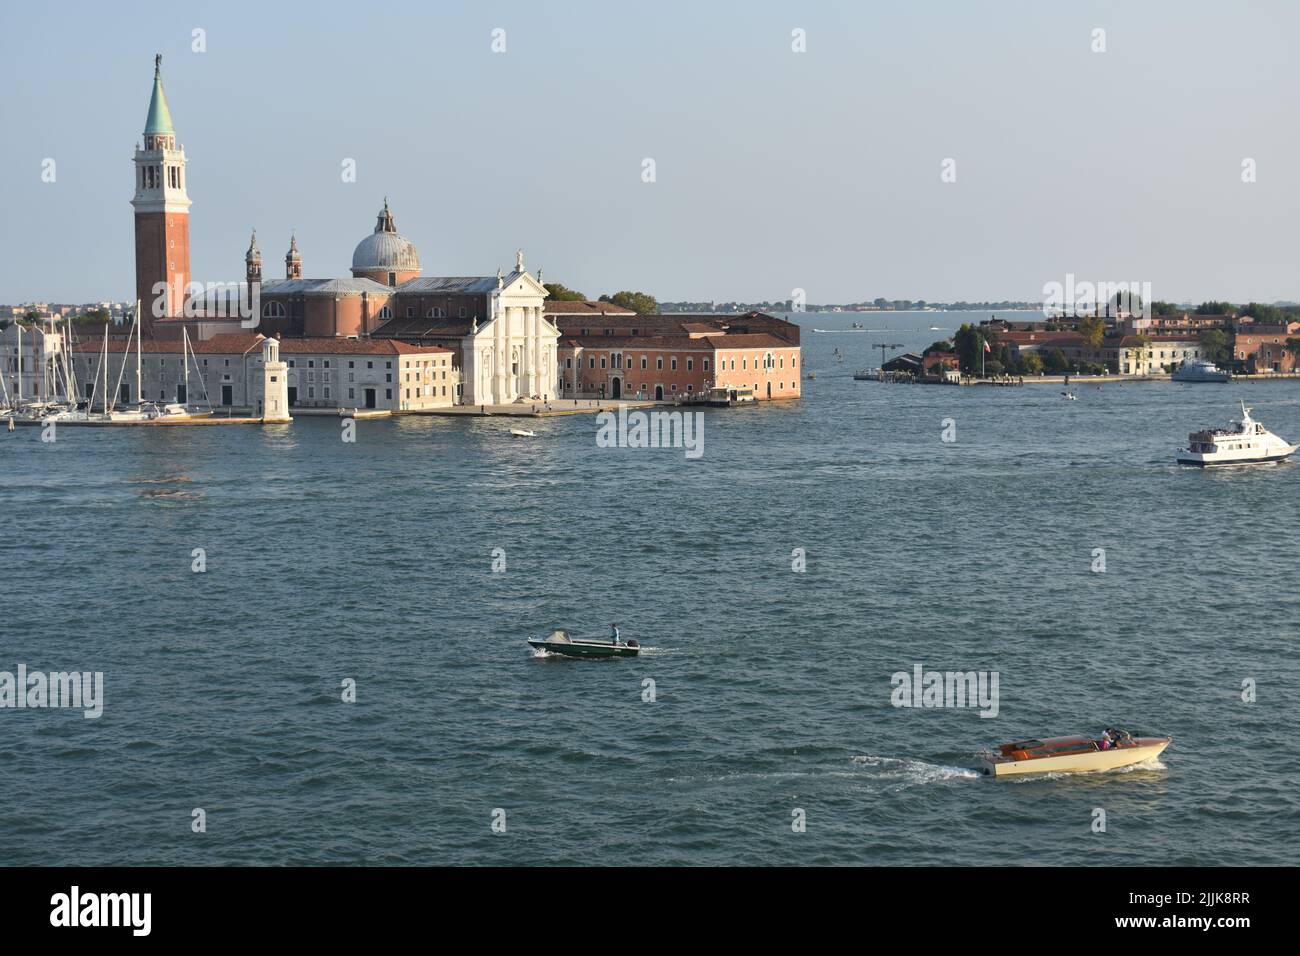 A scenic view of boats and architecture at the Venetian Lagoon,  Venice, Italy Stock Photo